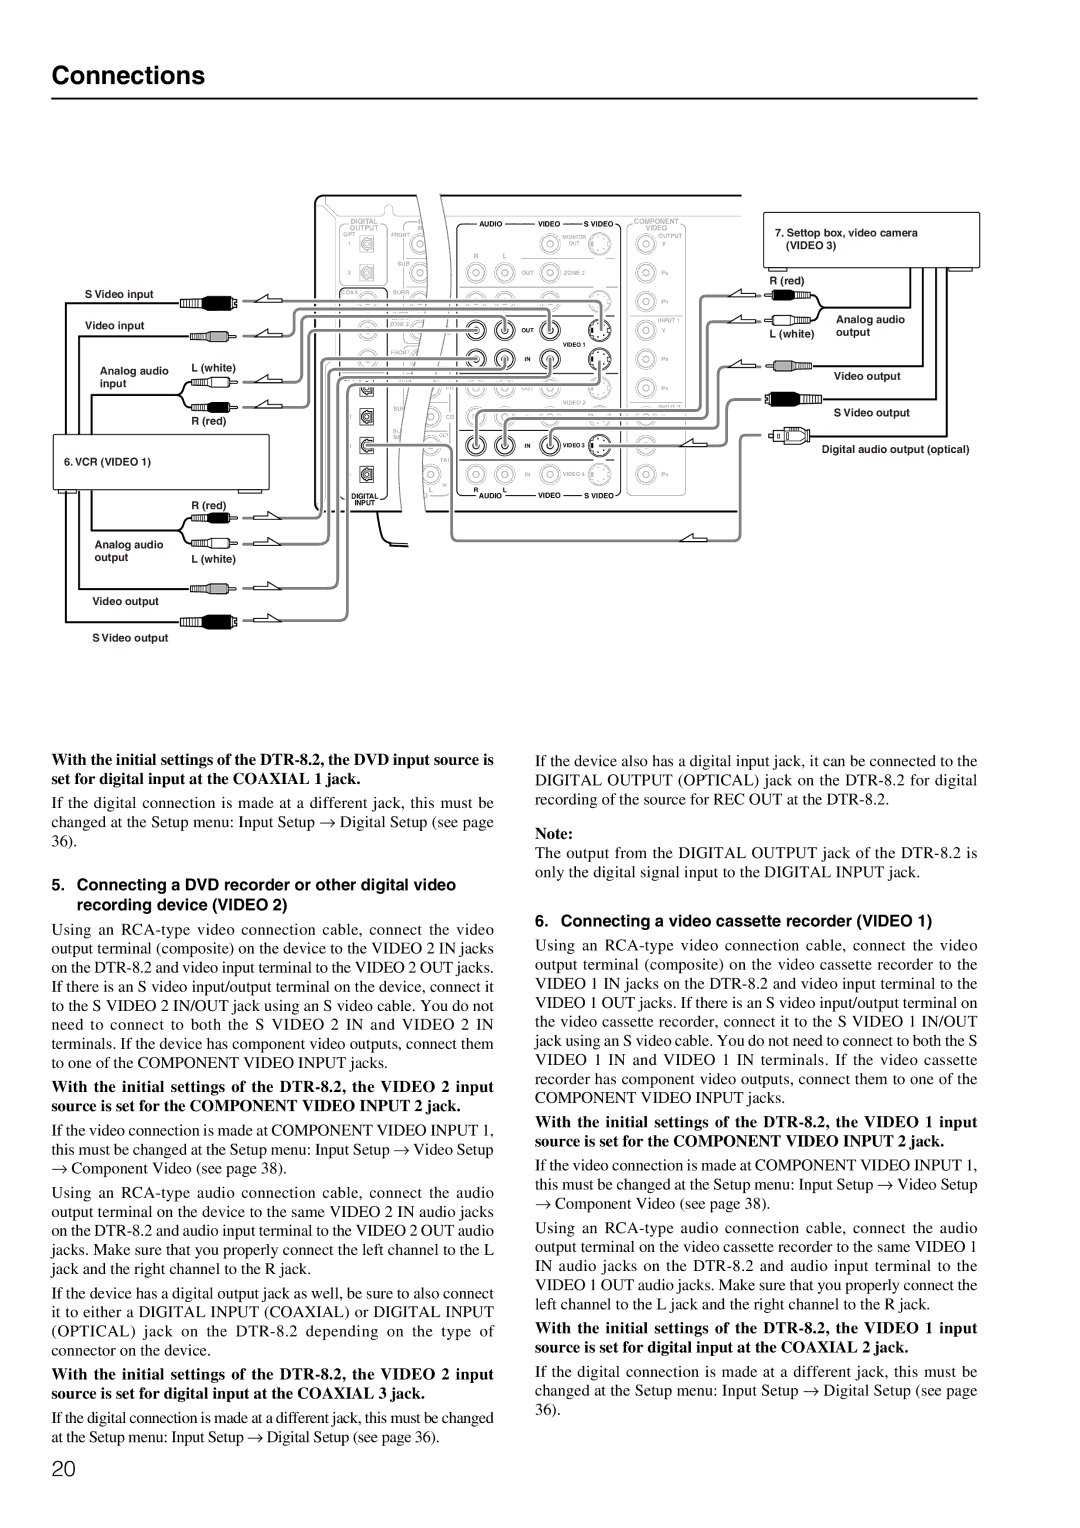 Integra DTR-8.2 instruction manual Connecting a video cassette recorder Video 